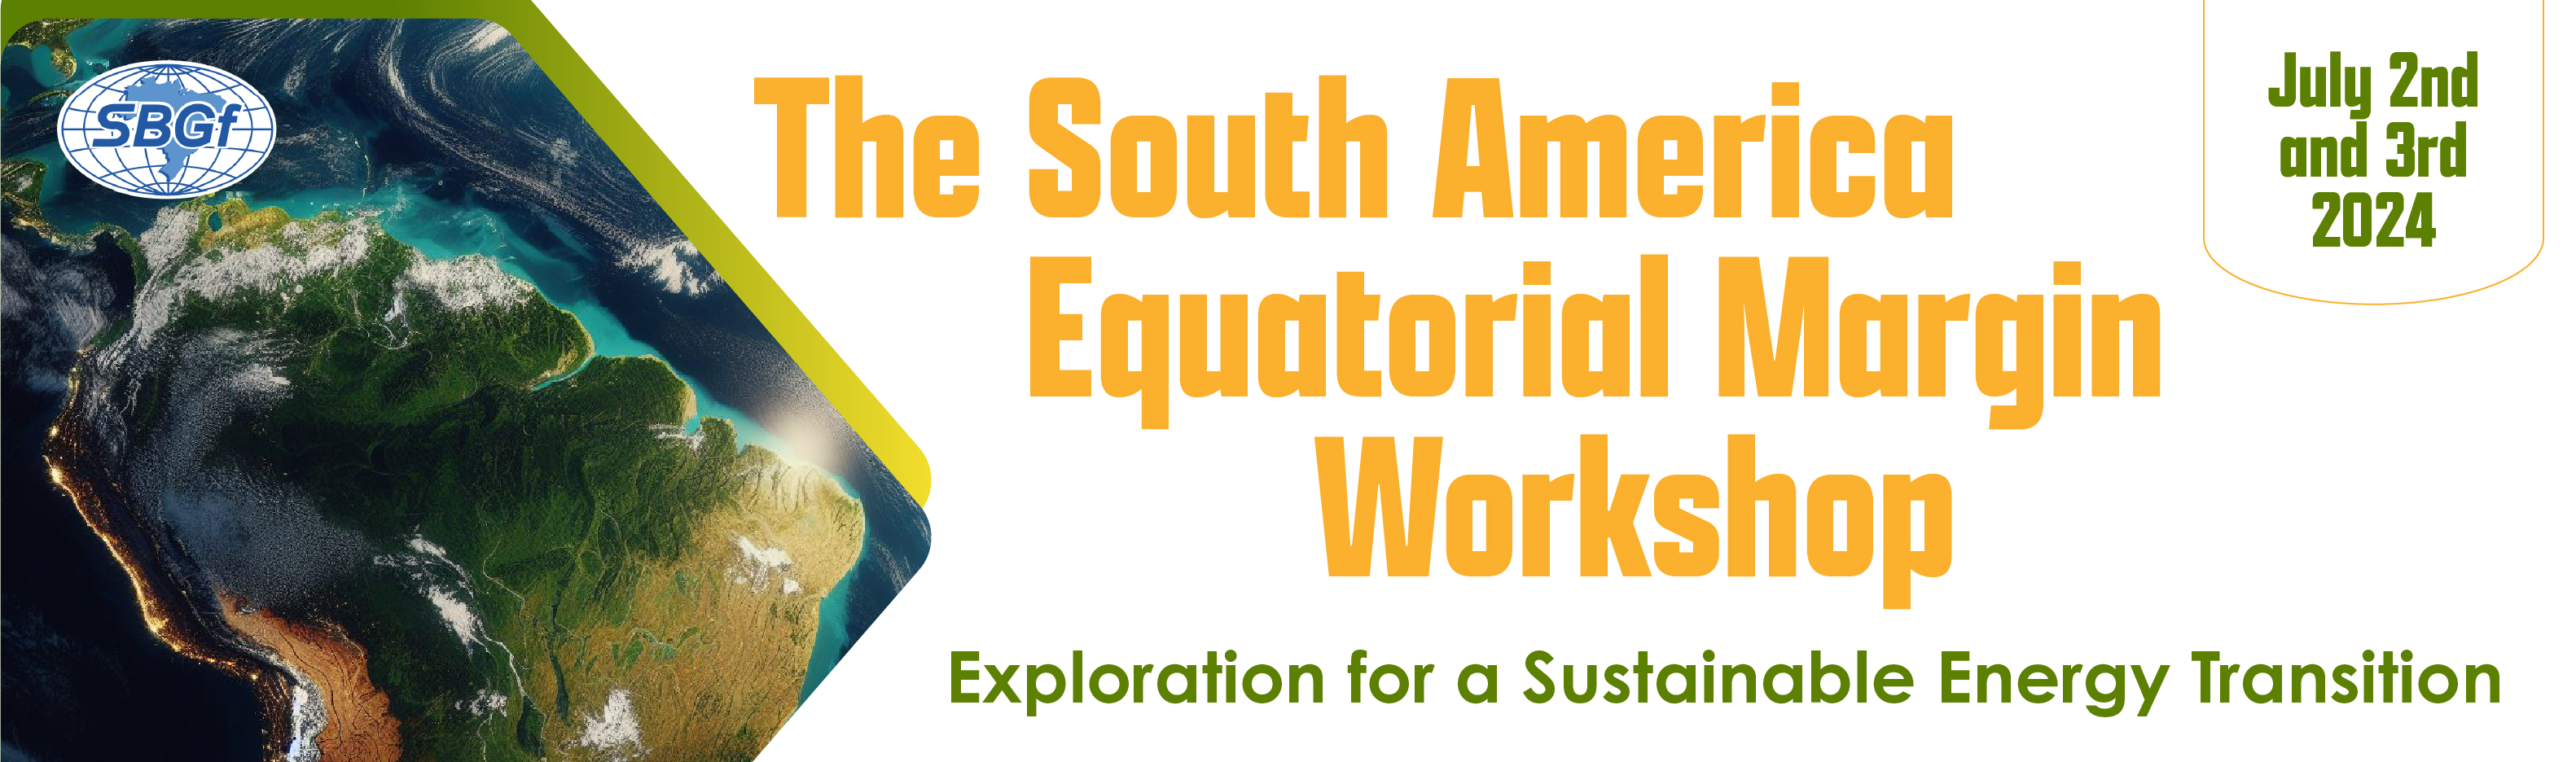 The South America Equatorial Margin Workshop - Exploration for a Sustainable Energy Transition